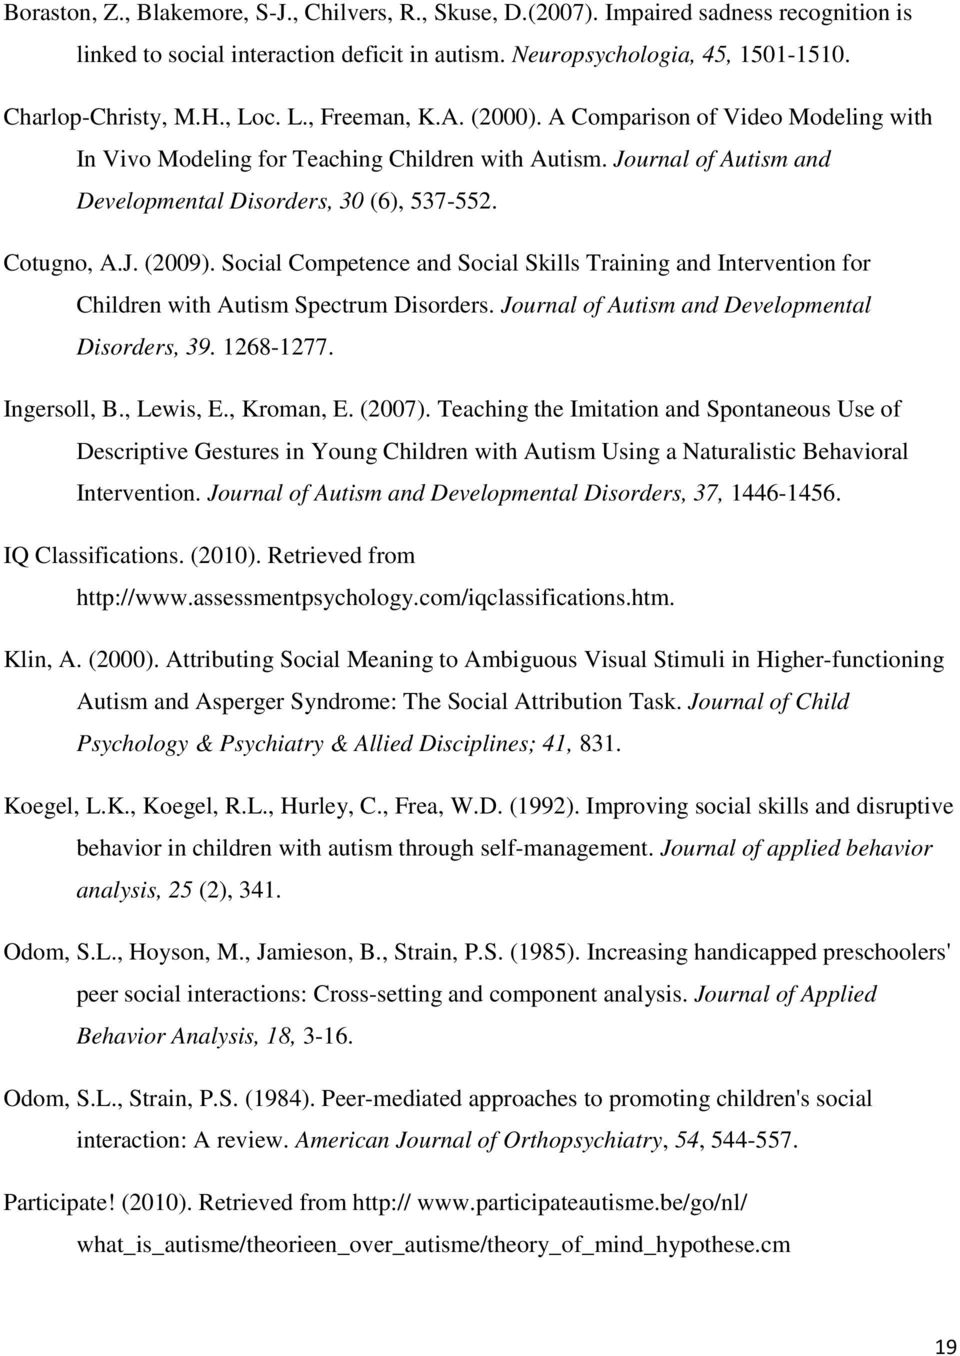 Social Competence and Social Skills Training and Intervention for Children with Autism Spectrum Disorders. Journal of Autism and Developmental Disorders, 39. 1268-1277. Ingersoll, B., Lewis, E.